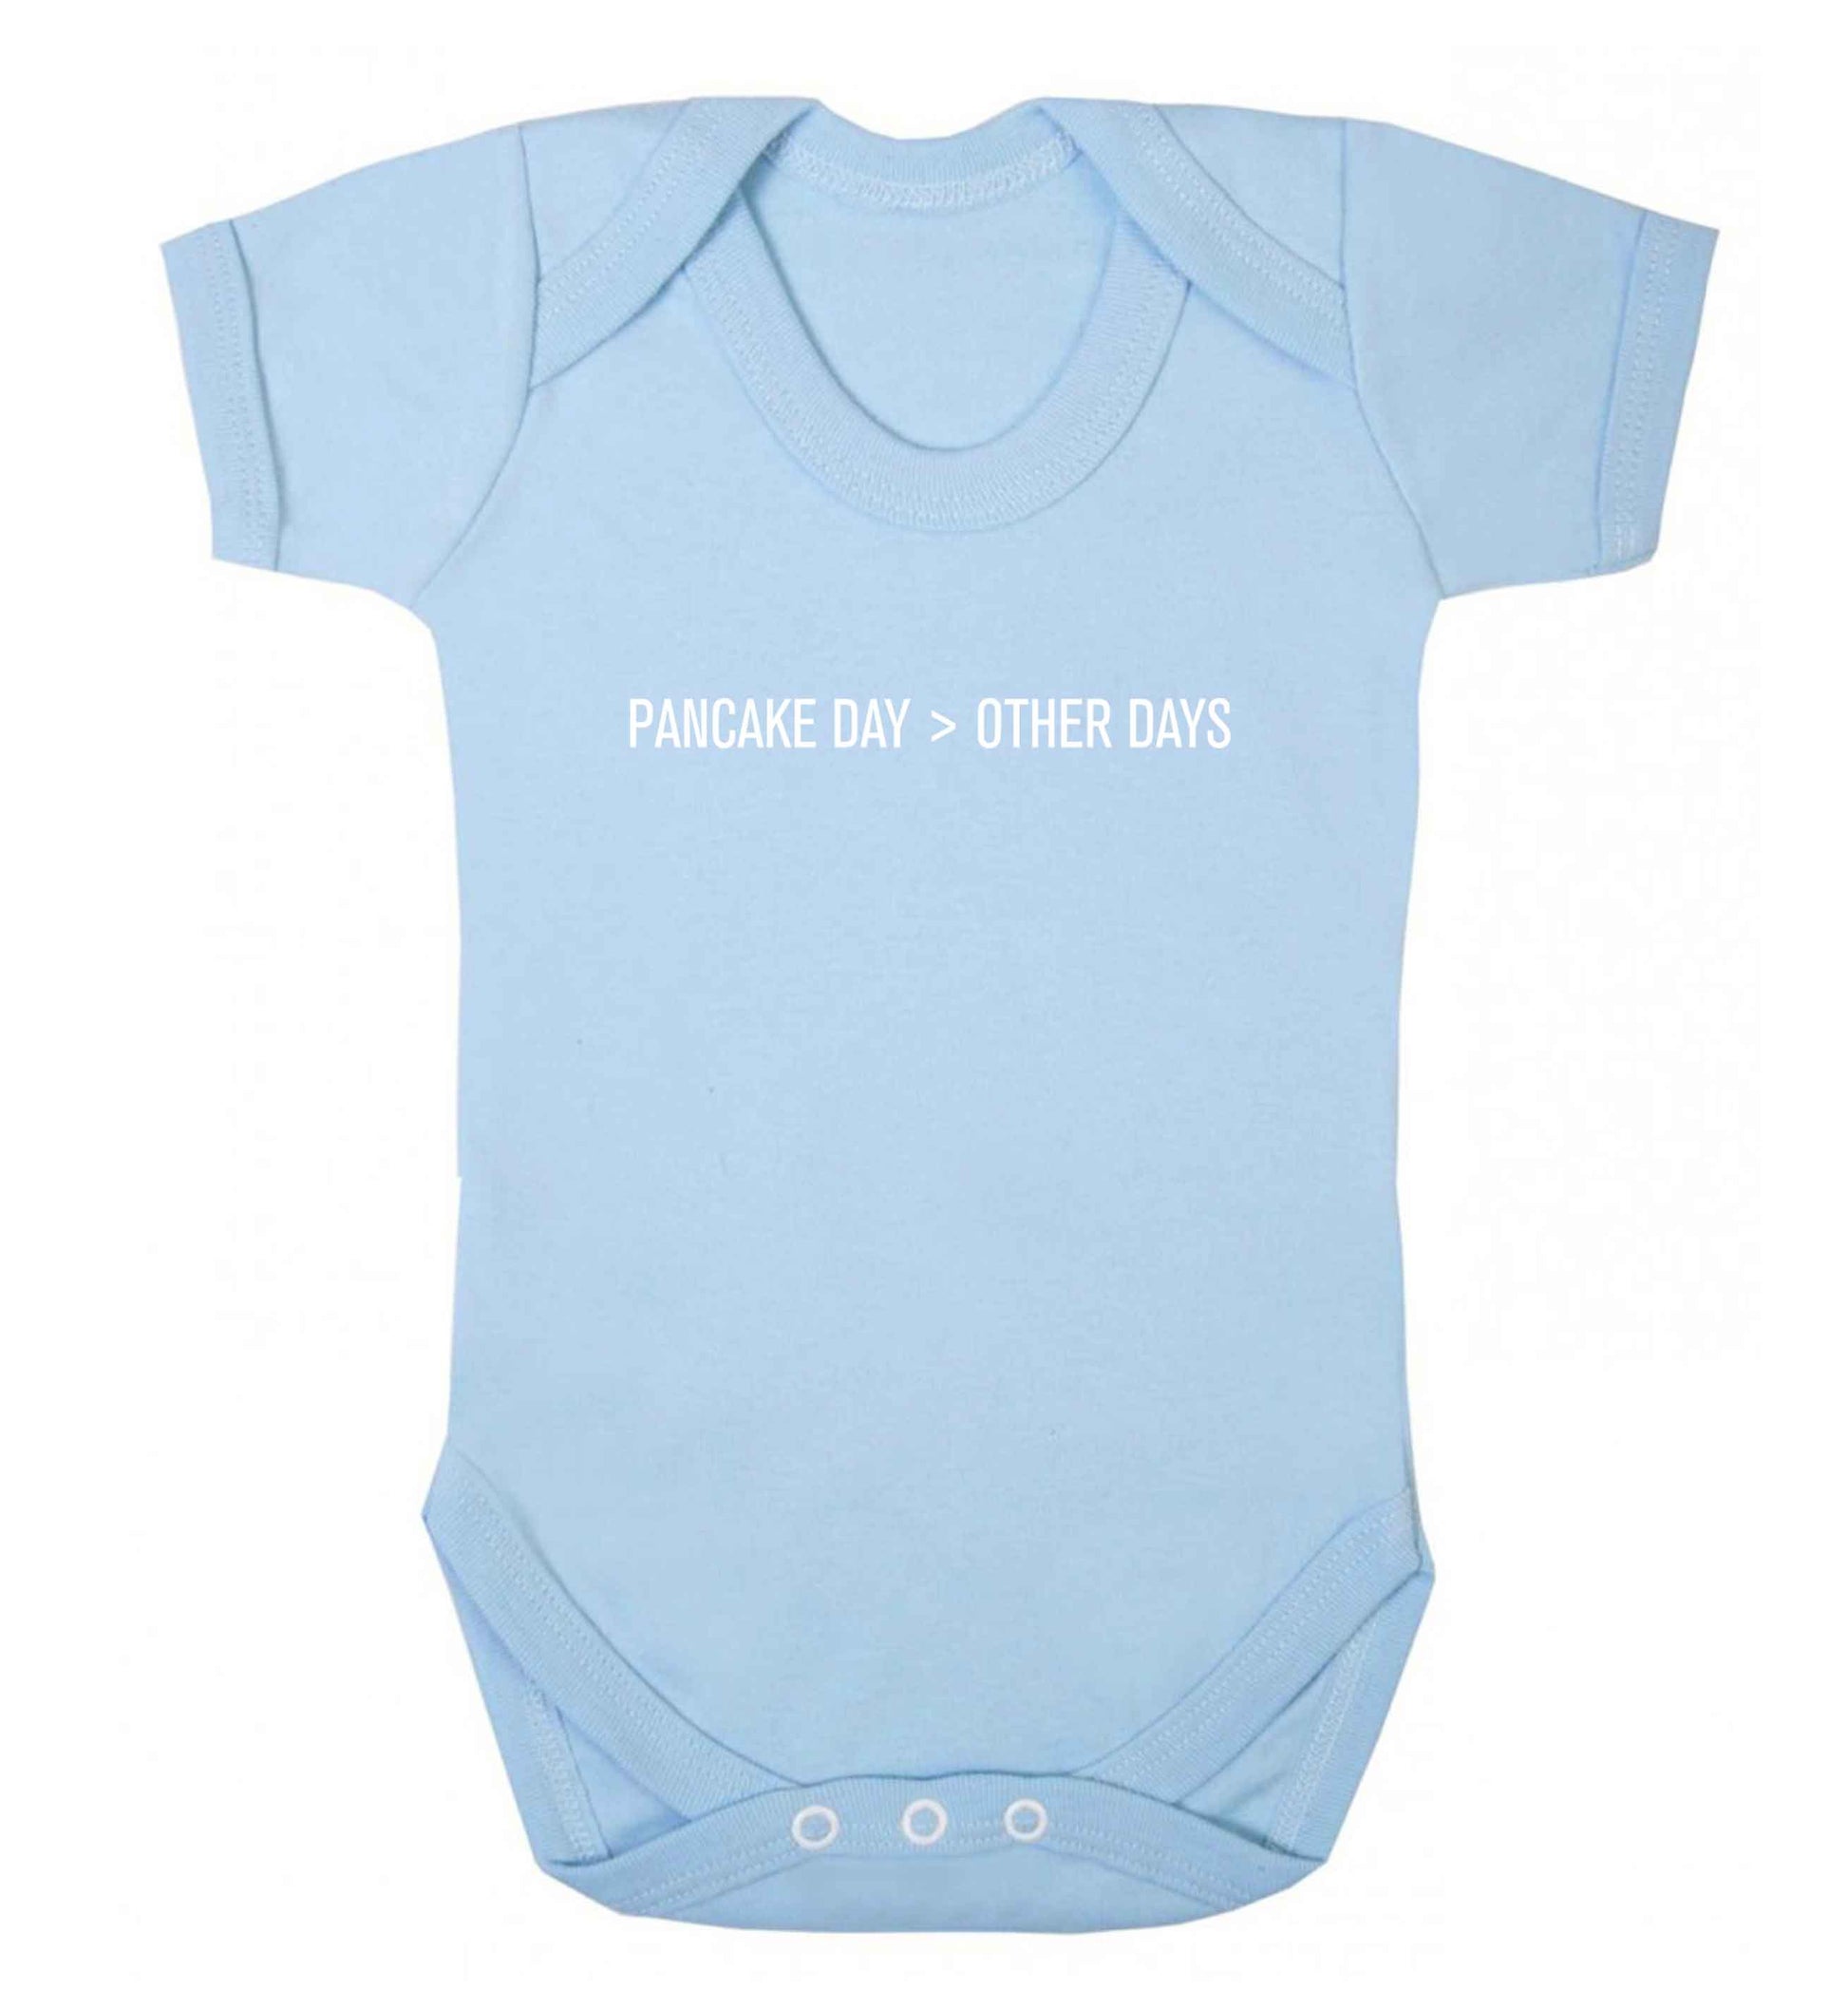 Pancake day > other days baby vest pale blue 18-24 months